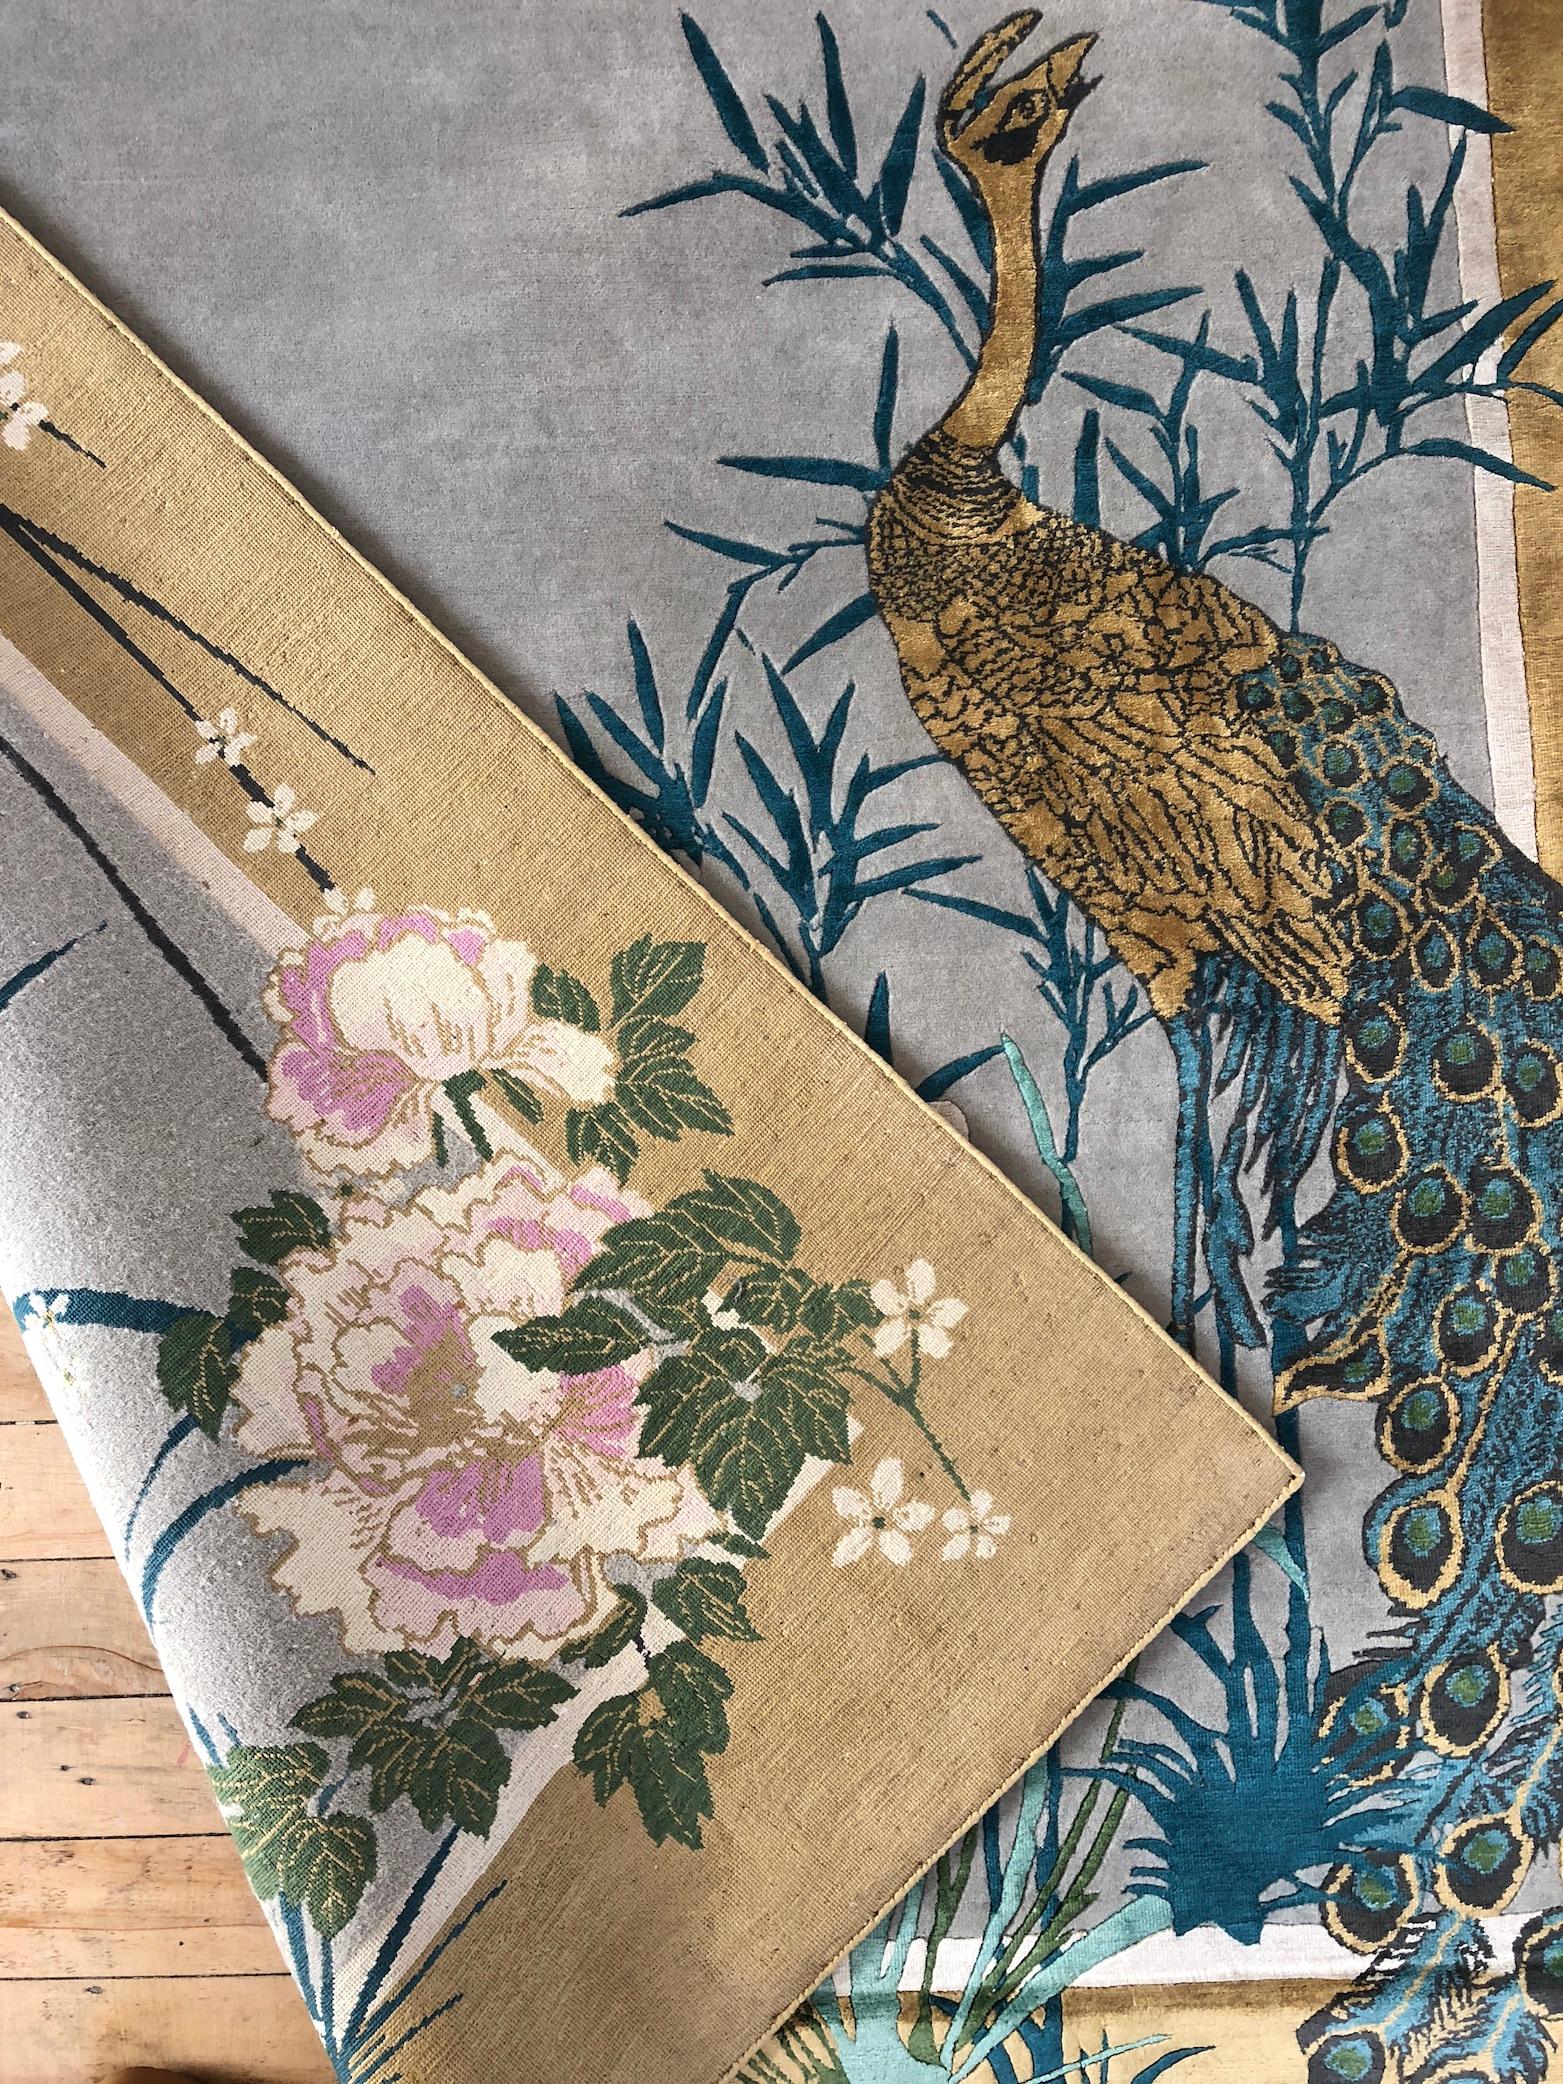 Chinese Garden of Virtue is a hand knotted wool & silk rug by Scottish designer Wendy Morrison. The rug is handcrafted in India using only the finest wool and silk and is Goodweave certified, meaning you can be confident that no child labour has